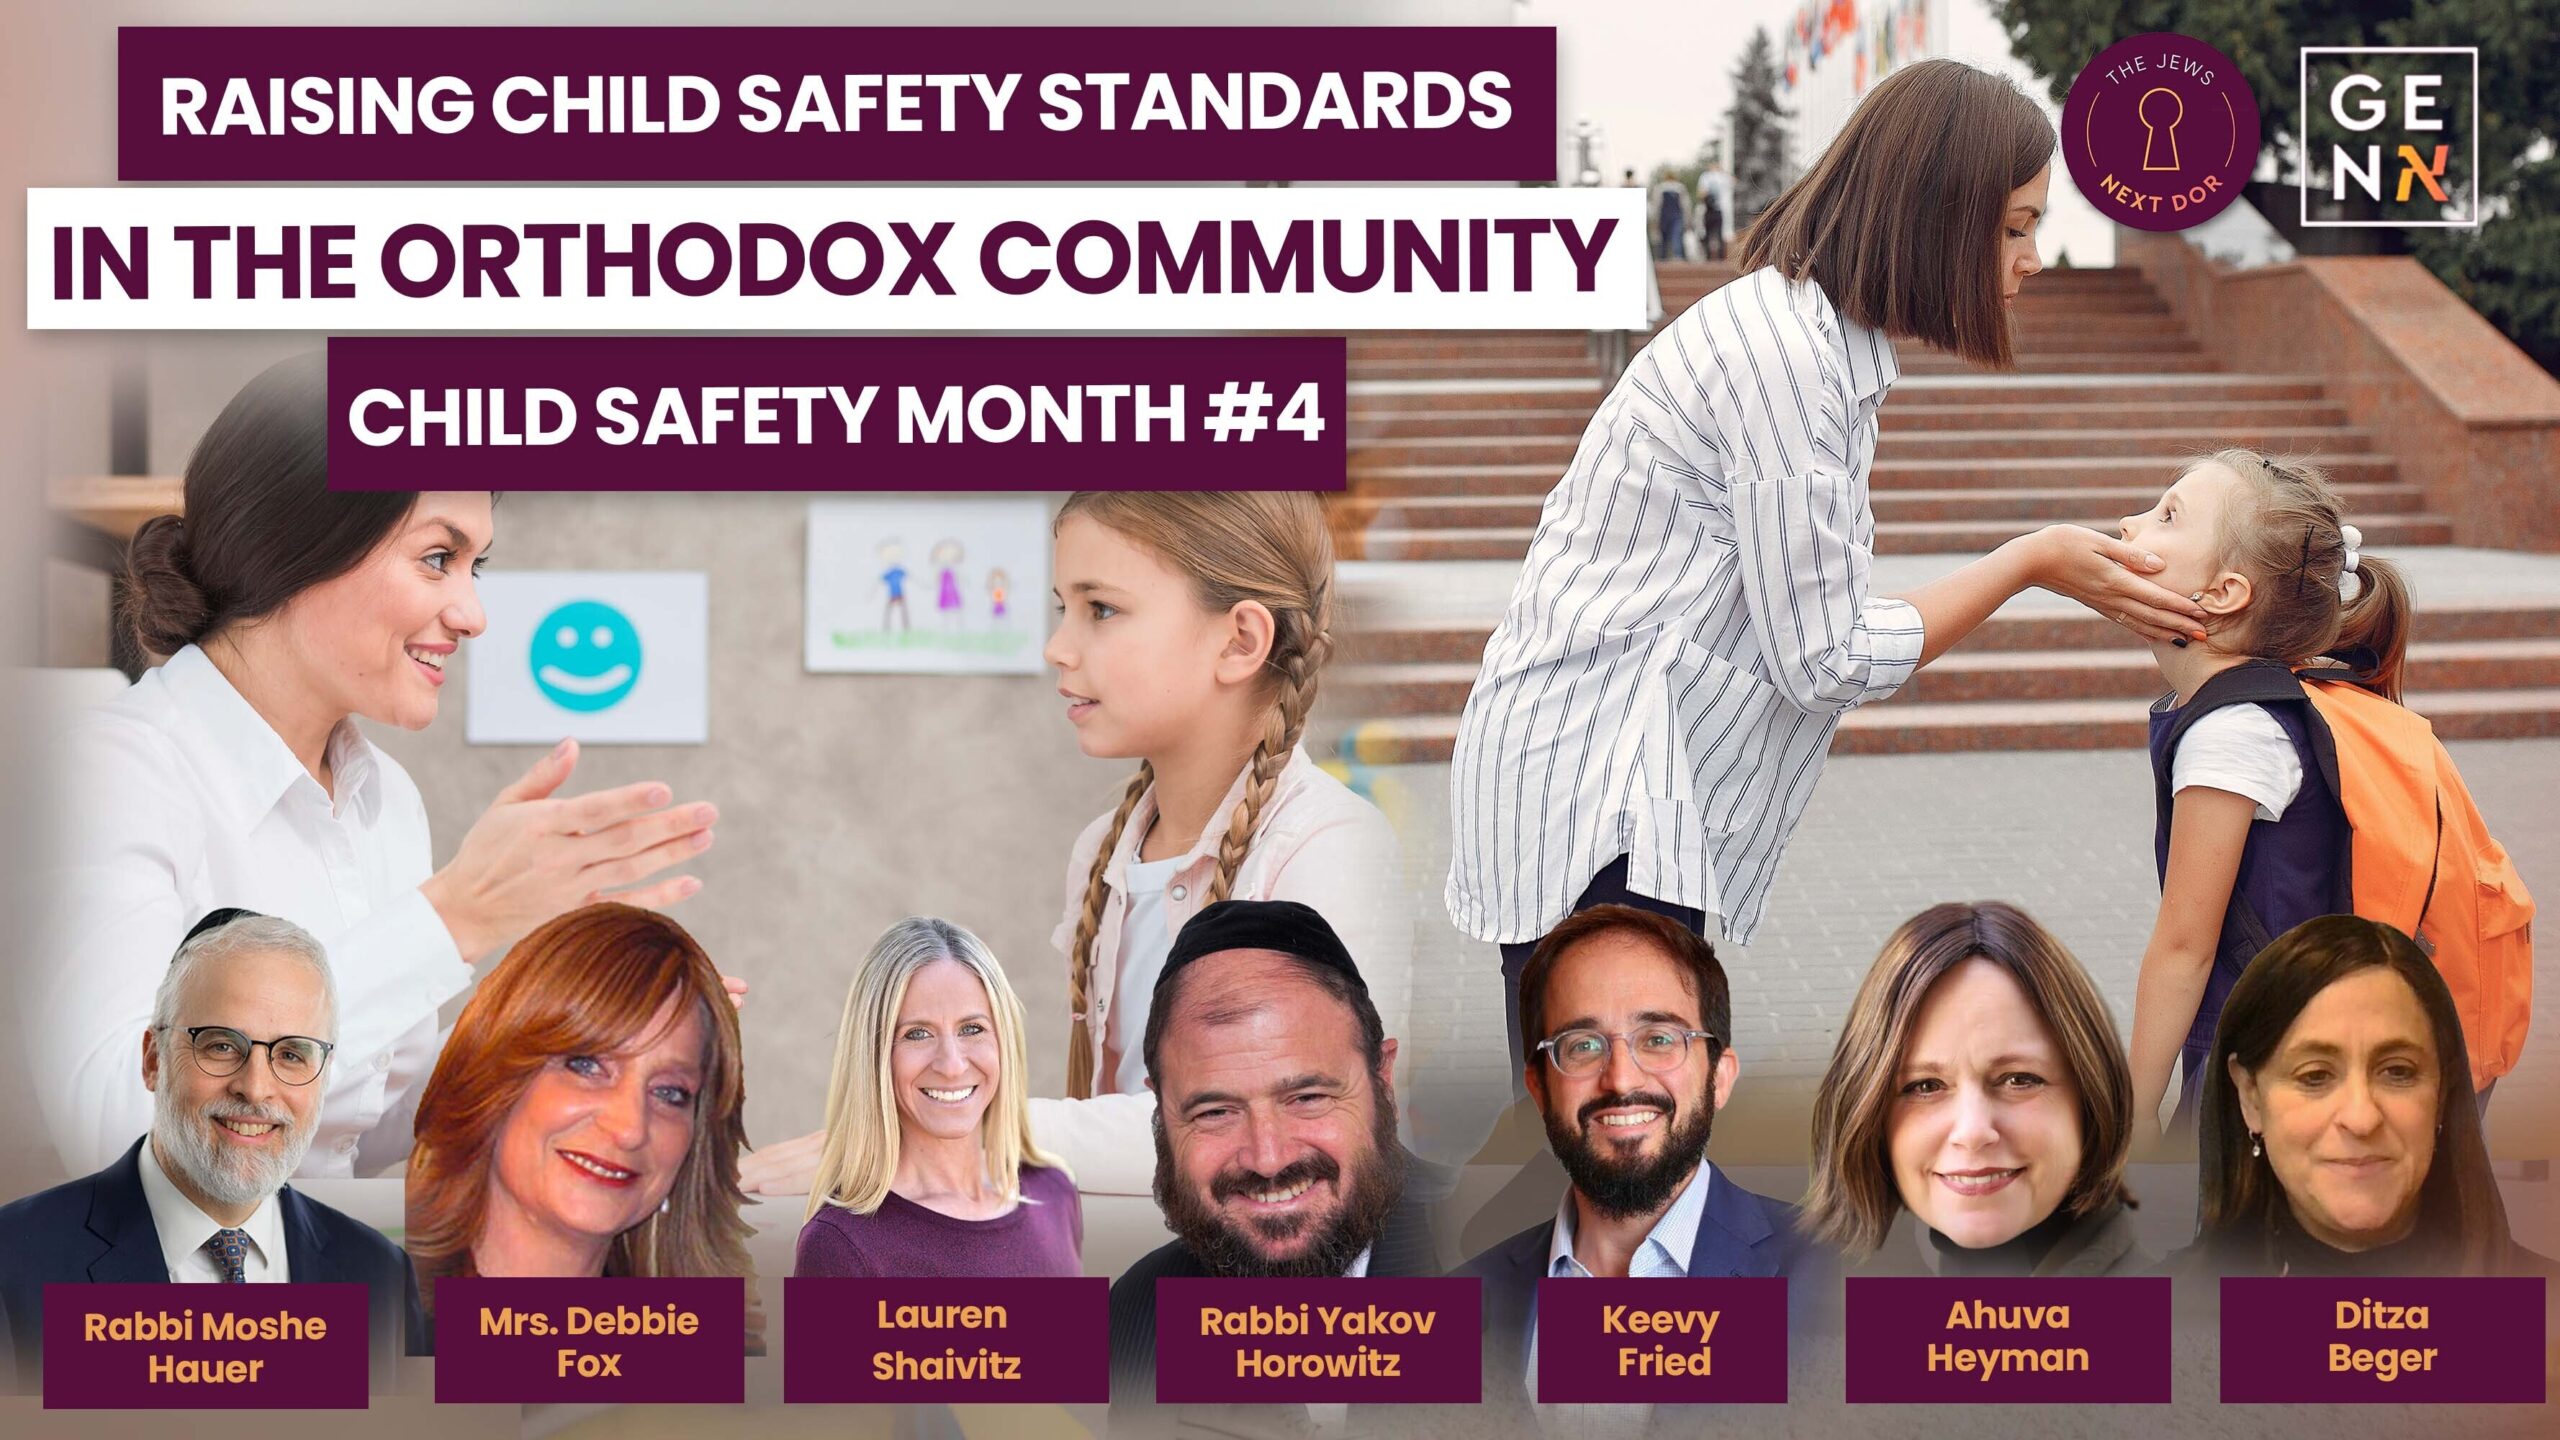 Child Safety: Policies That Protect, Education That Empowers – Child Safety Month #4